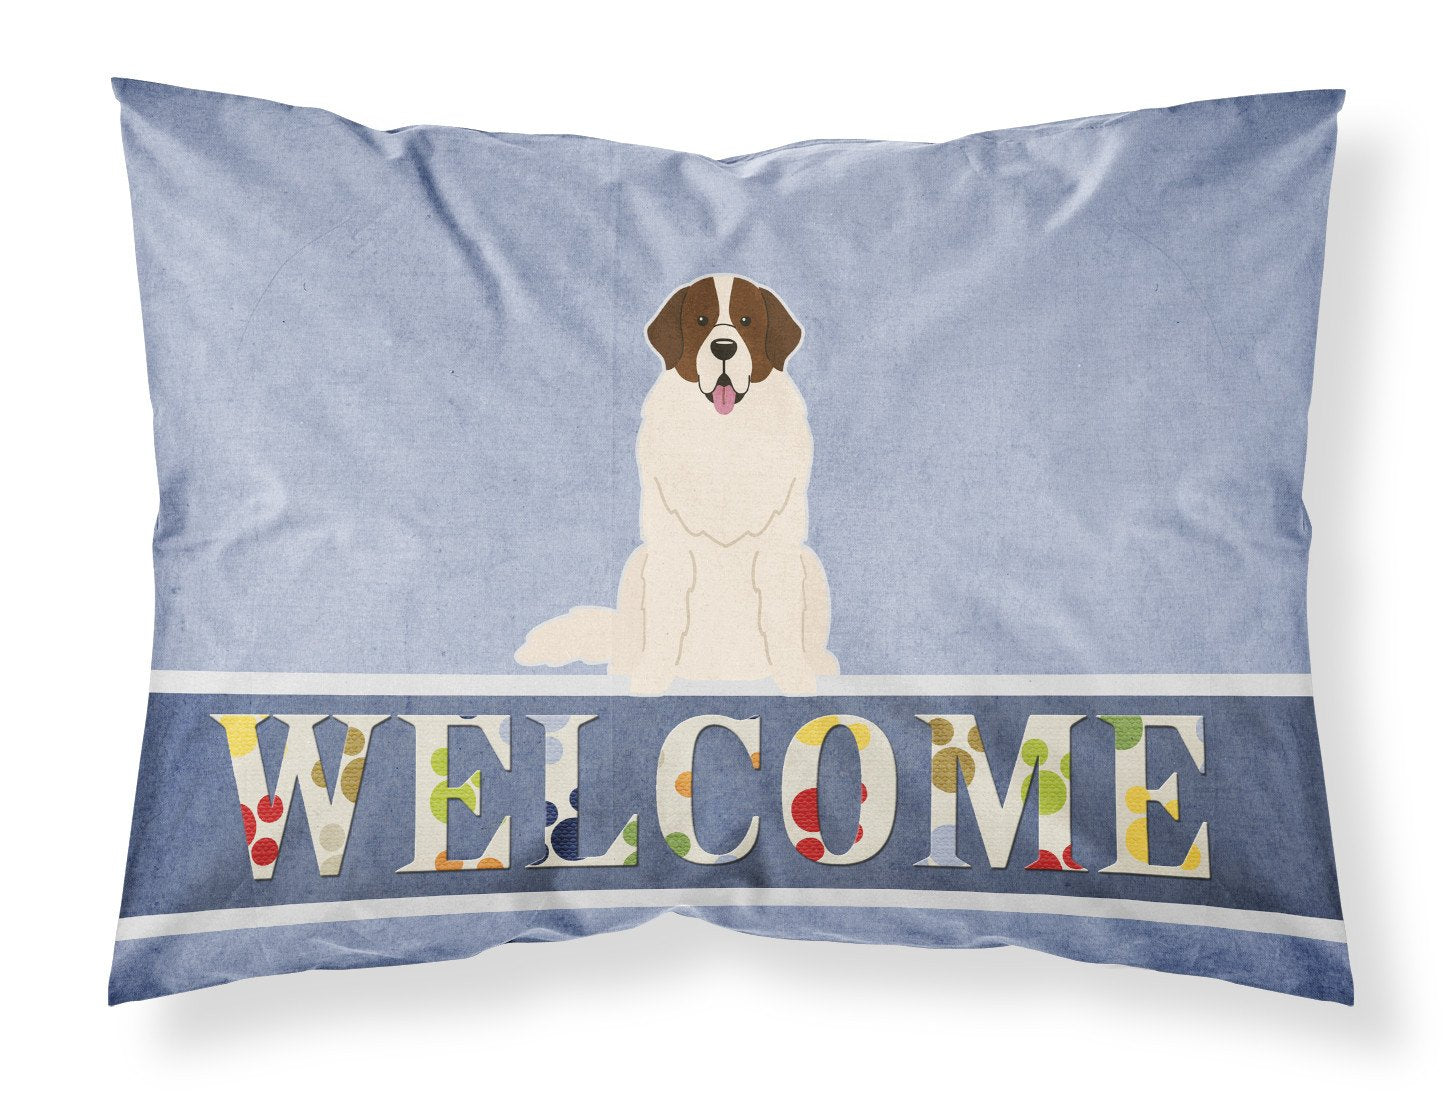 Moscow Watchdog Welcome Fabric Standard Pillowcase BB5608PILLOWCASE by Caroline's Treasures